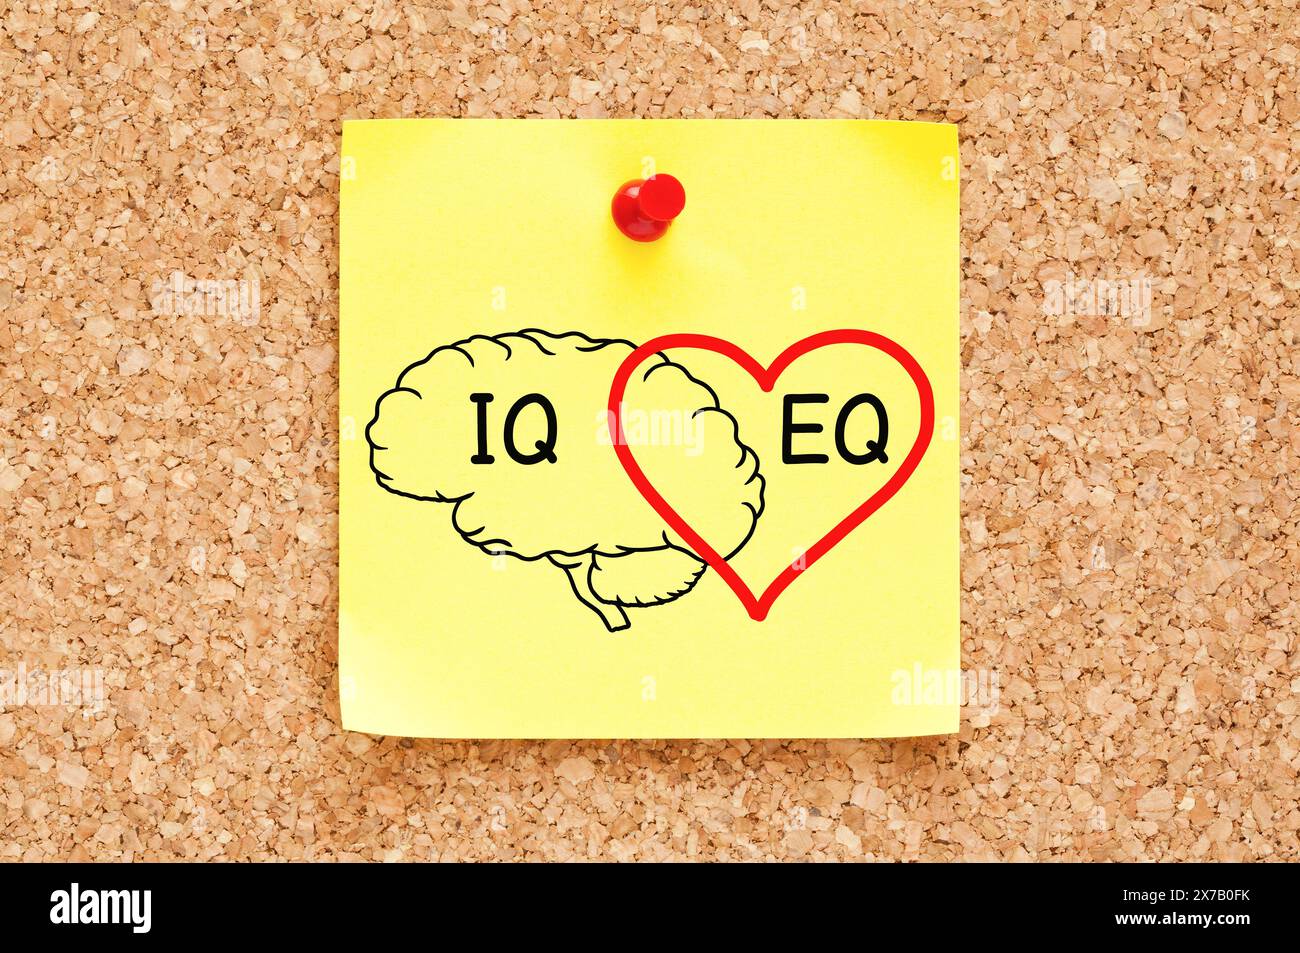 Brain and heart concept about IQ intelligence quotient and EQ emotional intelligence drawn on yellow sticky note. Stock Photo